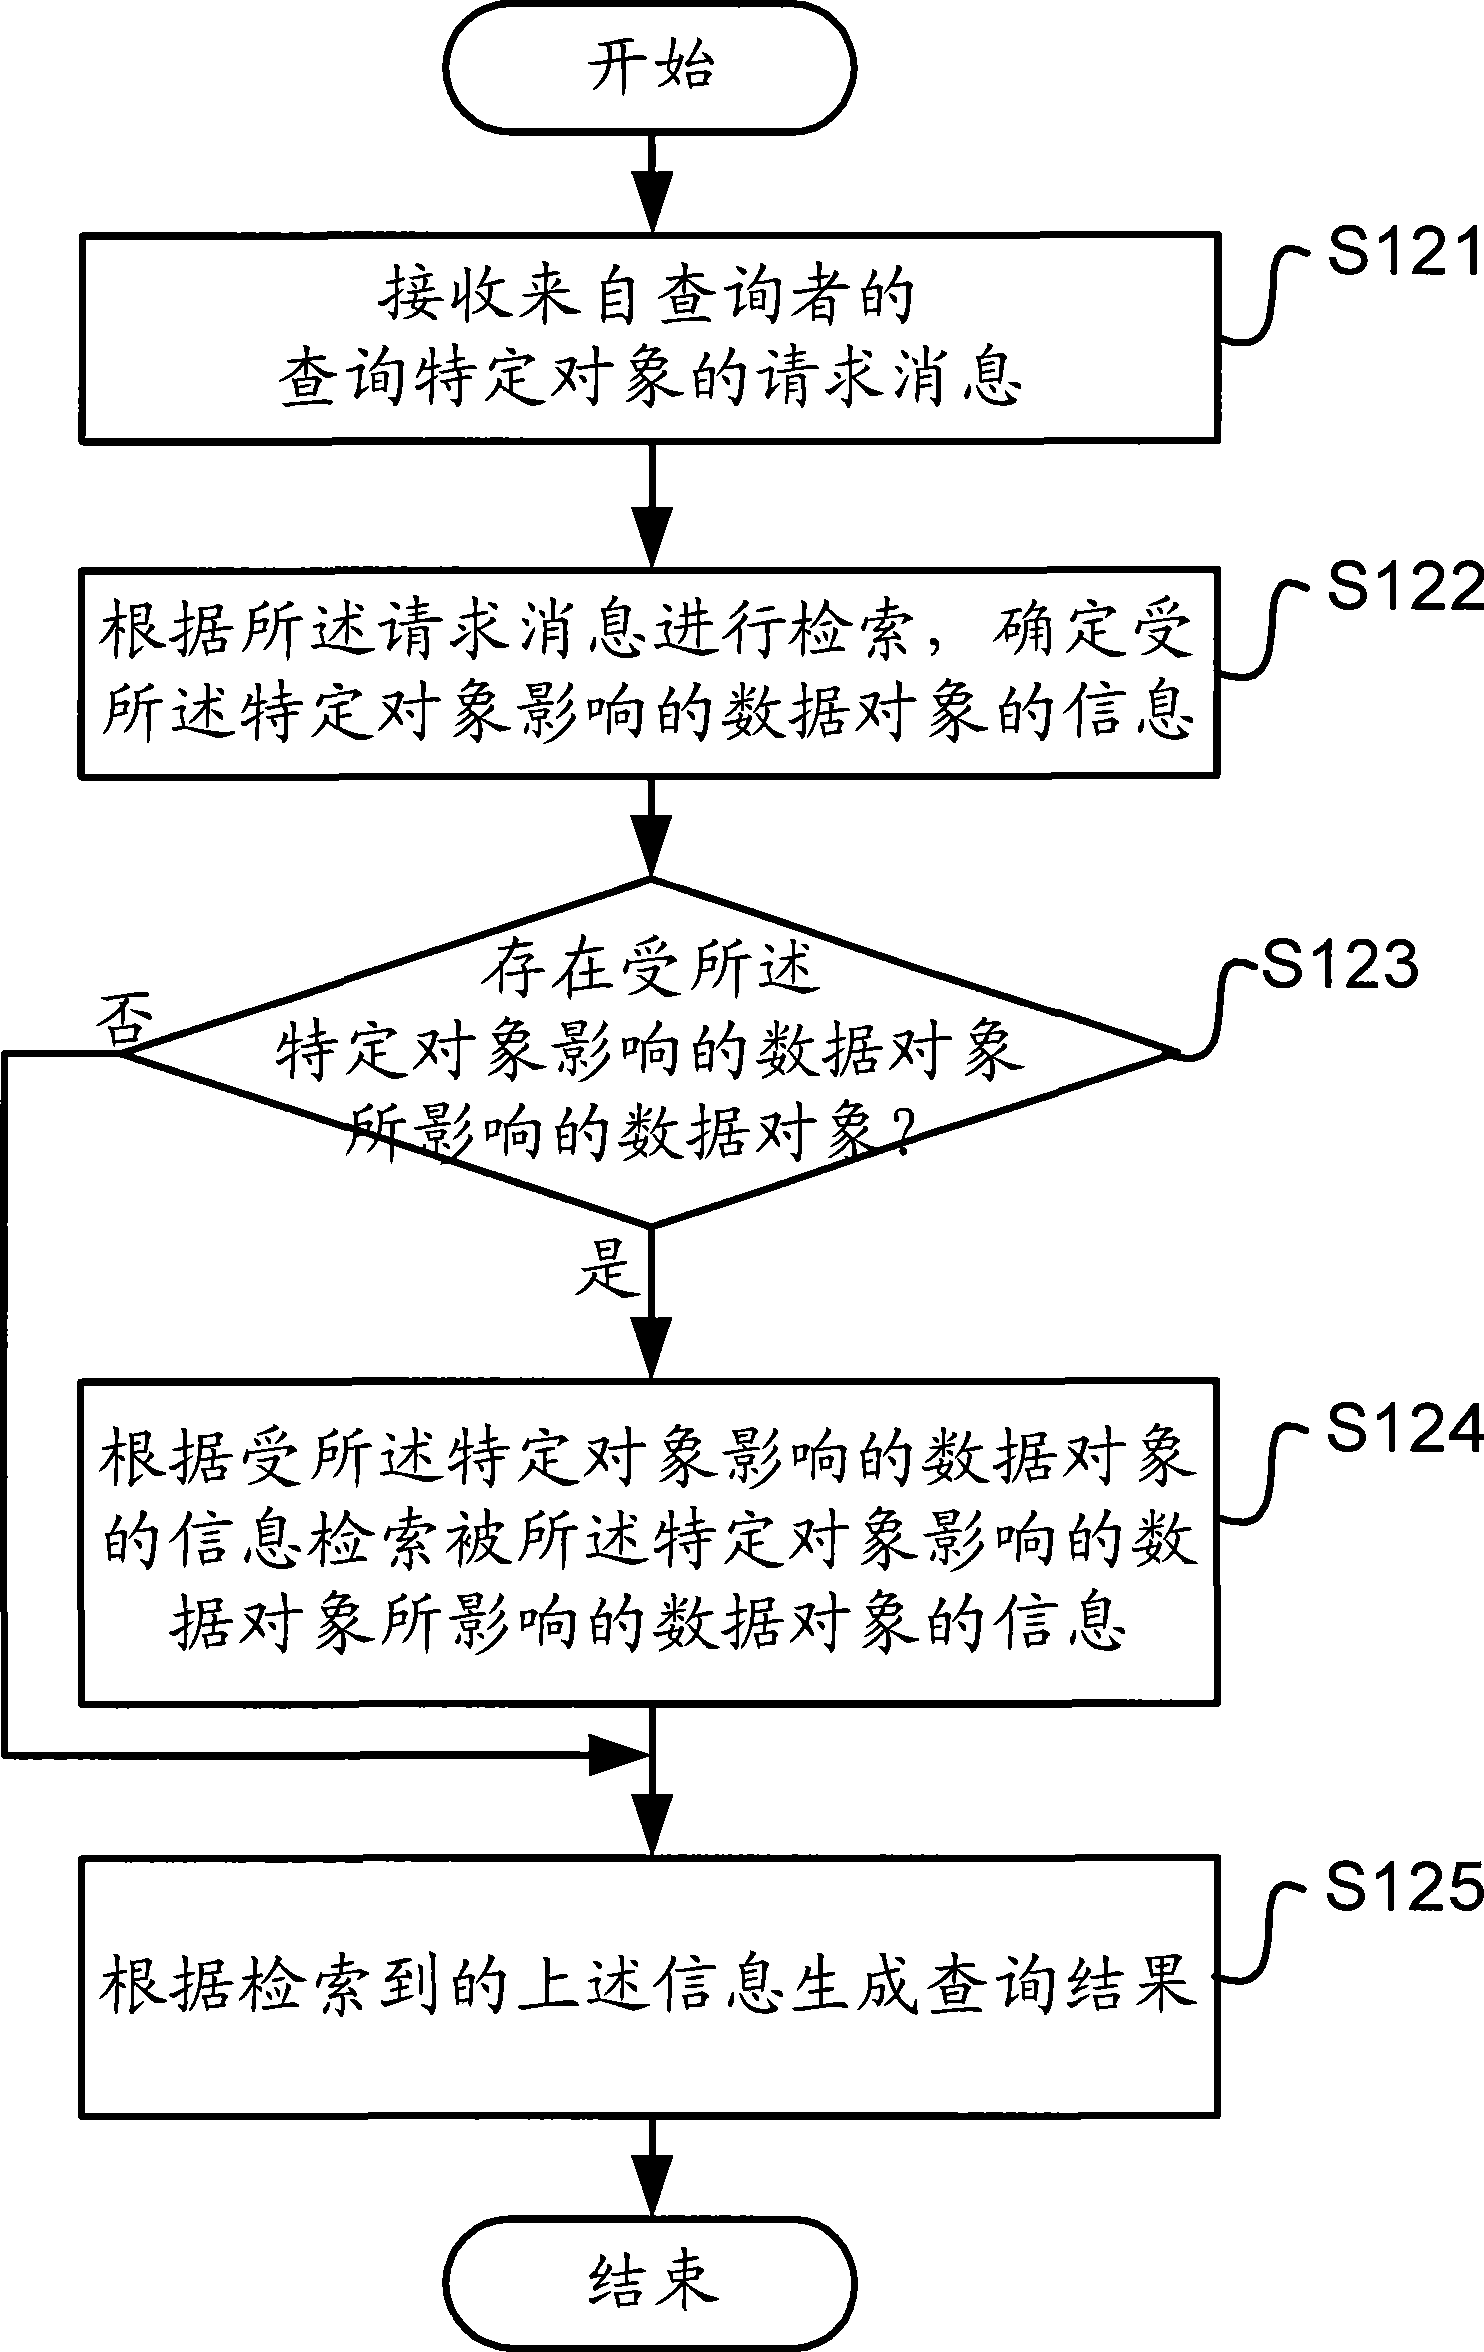 System and method for pre-analyzing according to relationship between metadata and data object